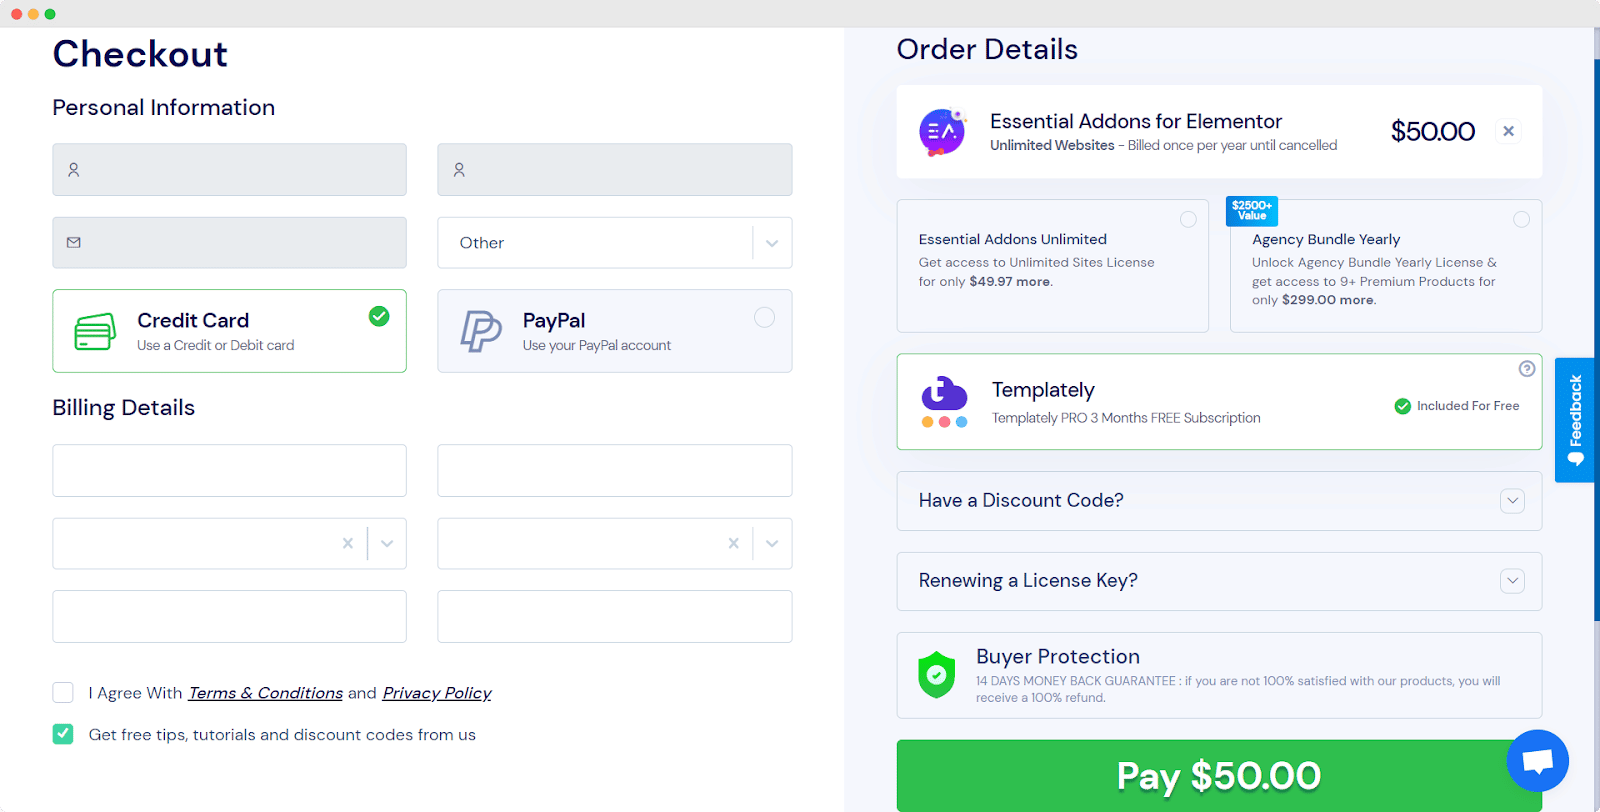 Using a Payment Method